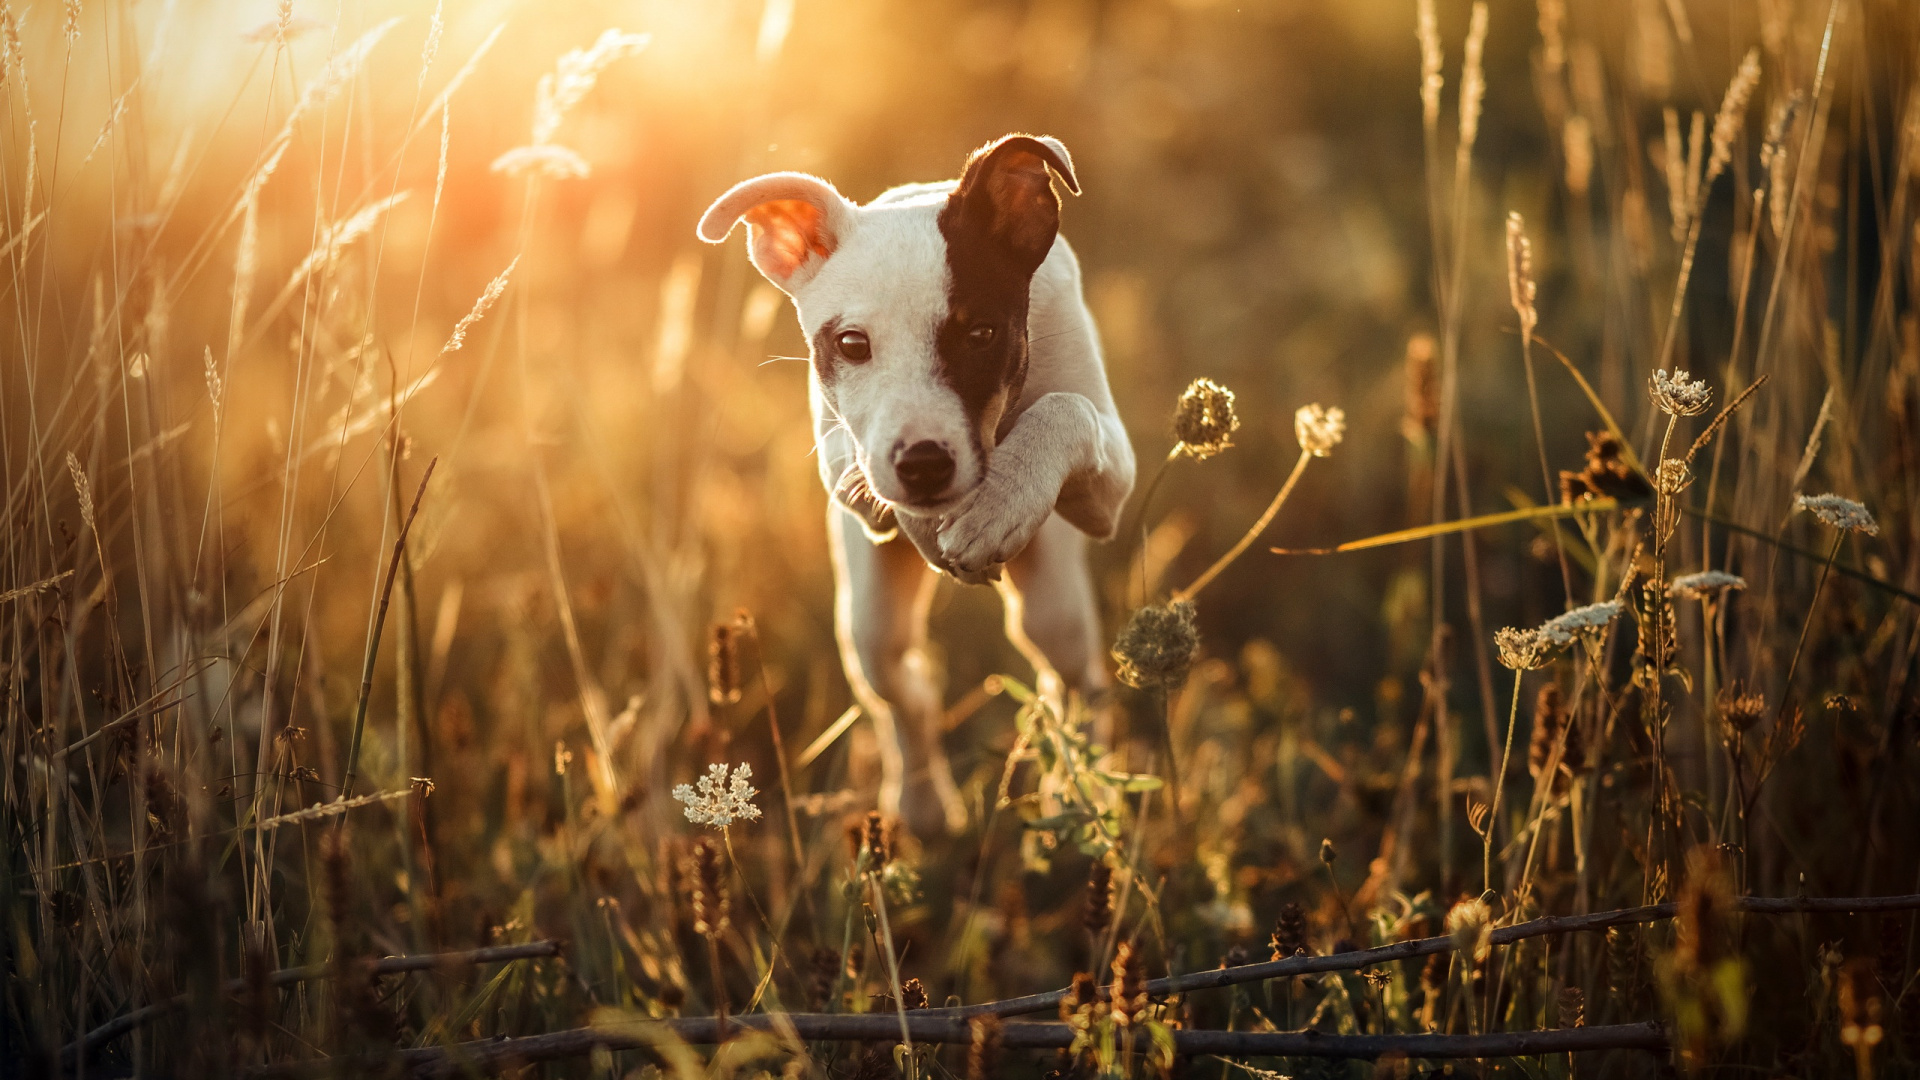 White and Brown Short Coat Small Dog on Green Grass Field During Daytime. Wallpaper in 1920x1080 Resolution